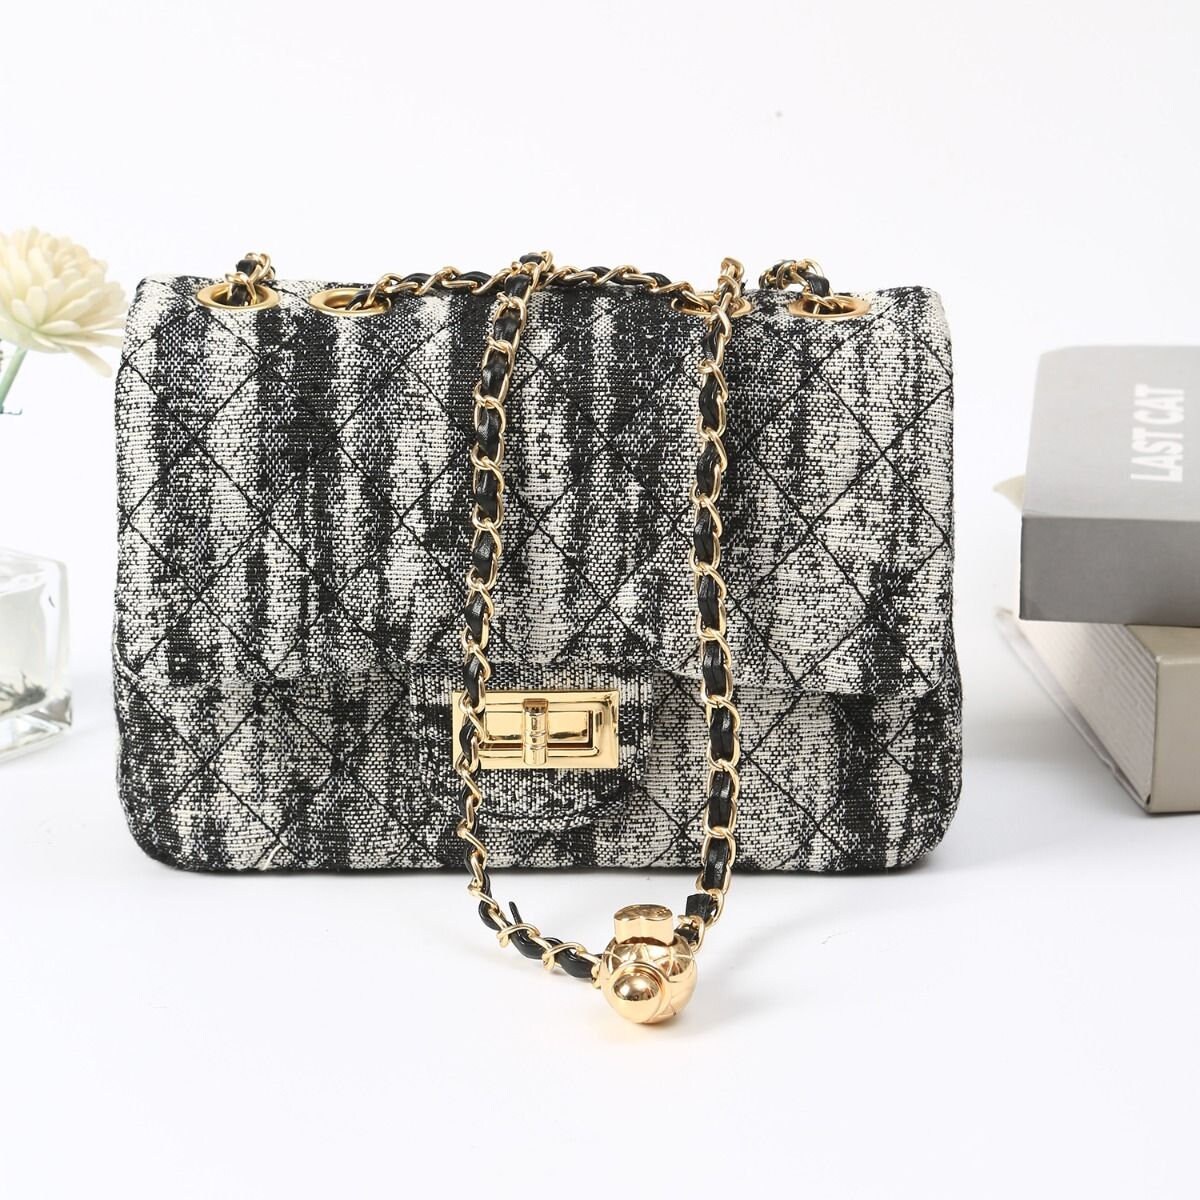 Chanel Taupe Tweed Large Timeless Tote